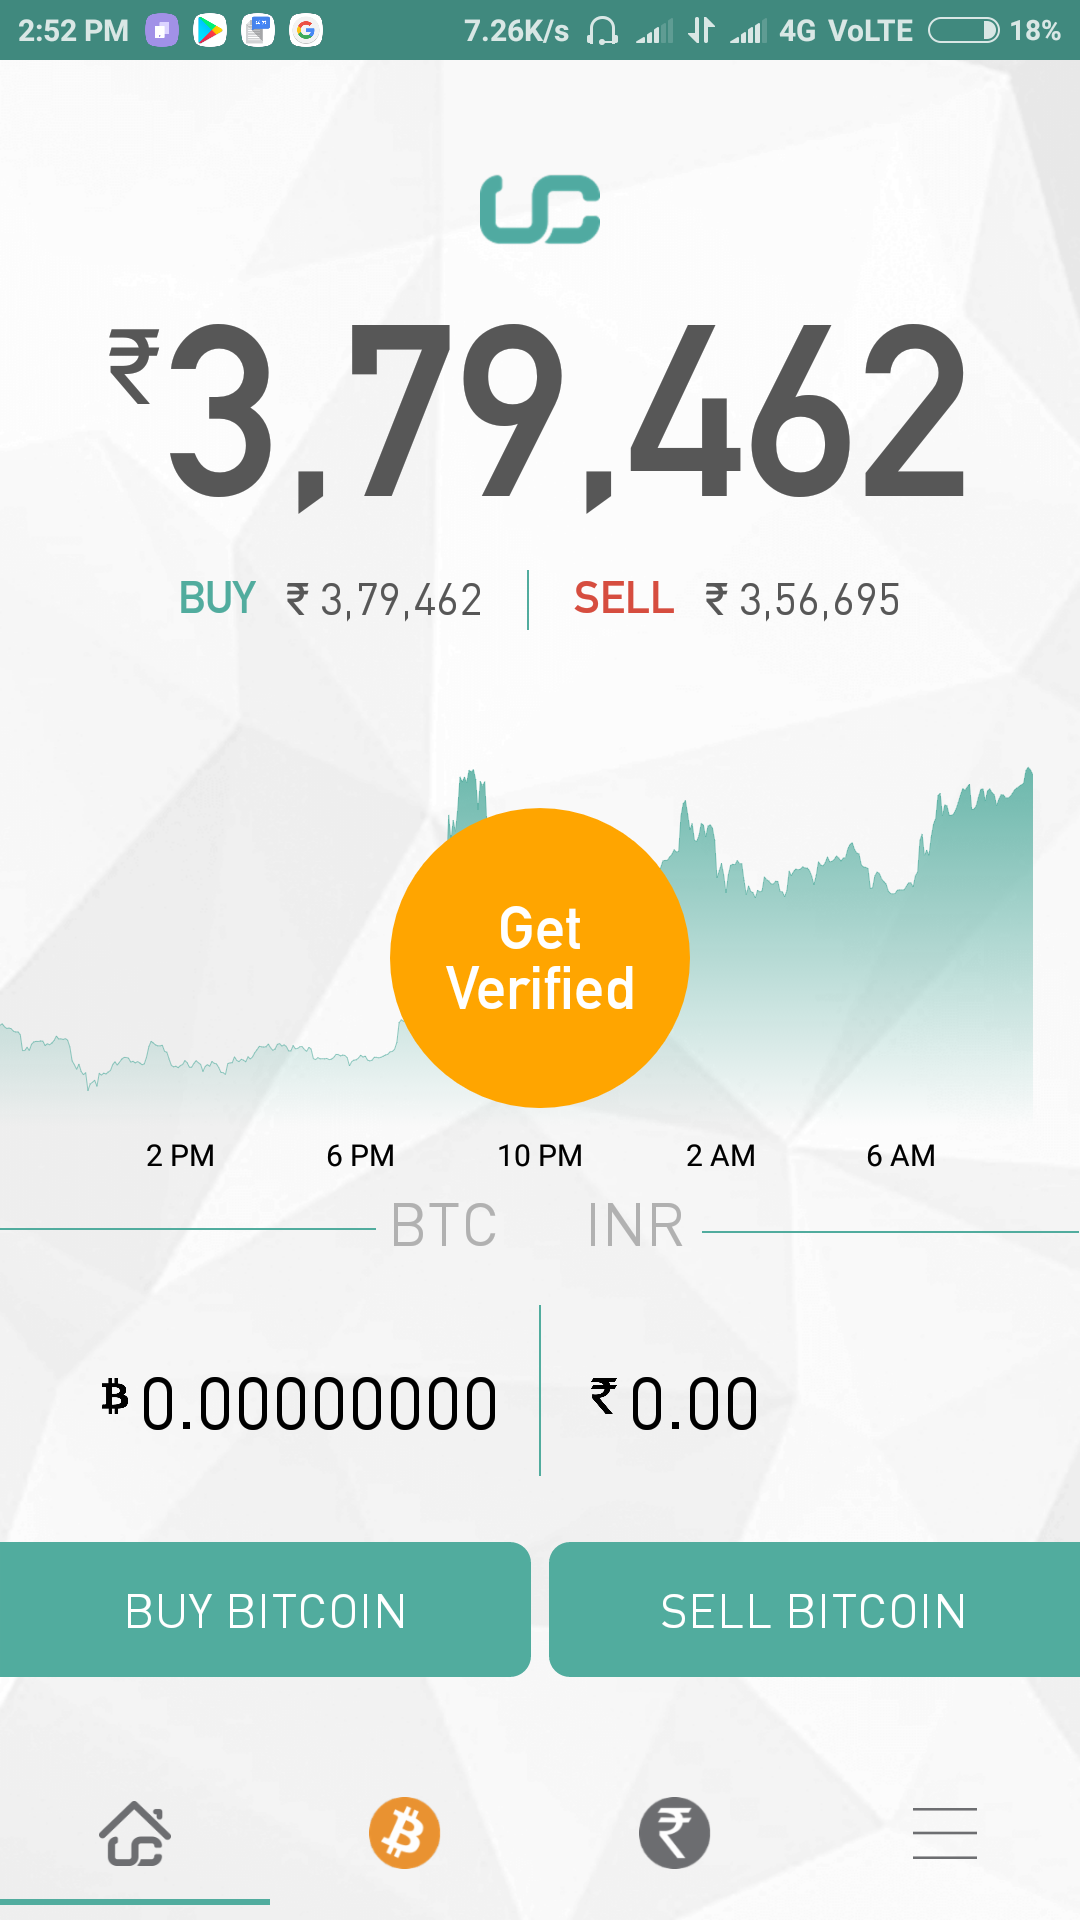 bitcoin status in india today